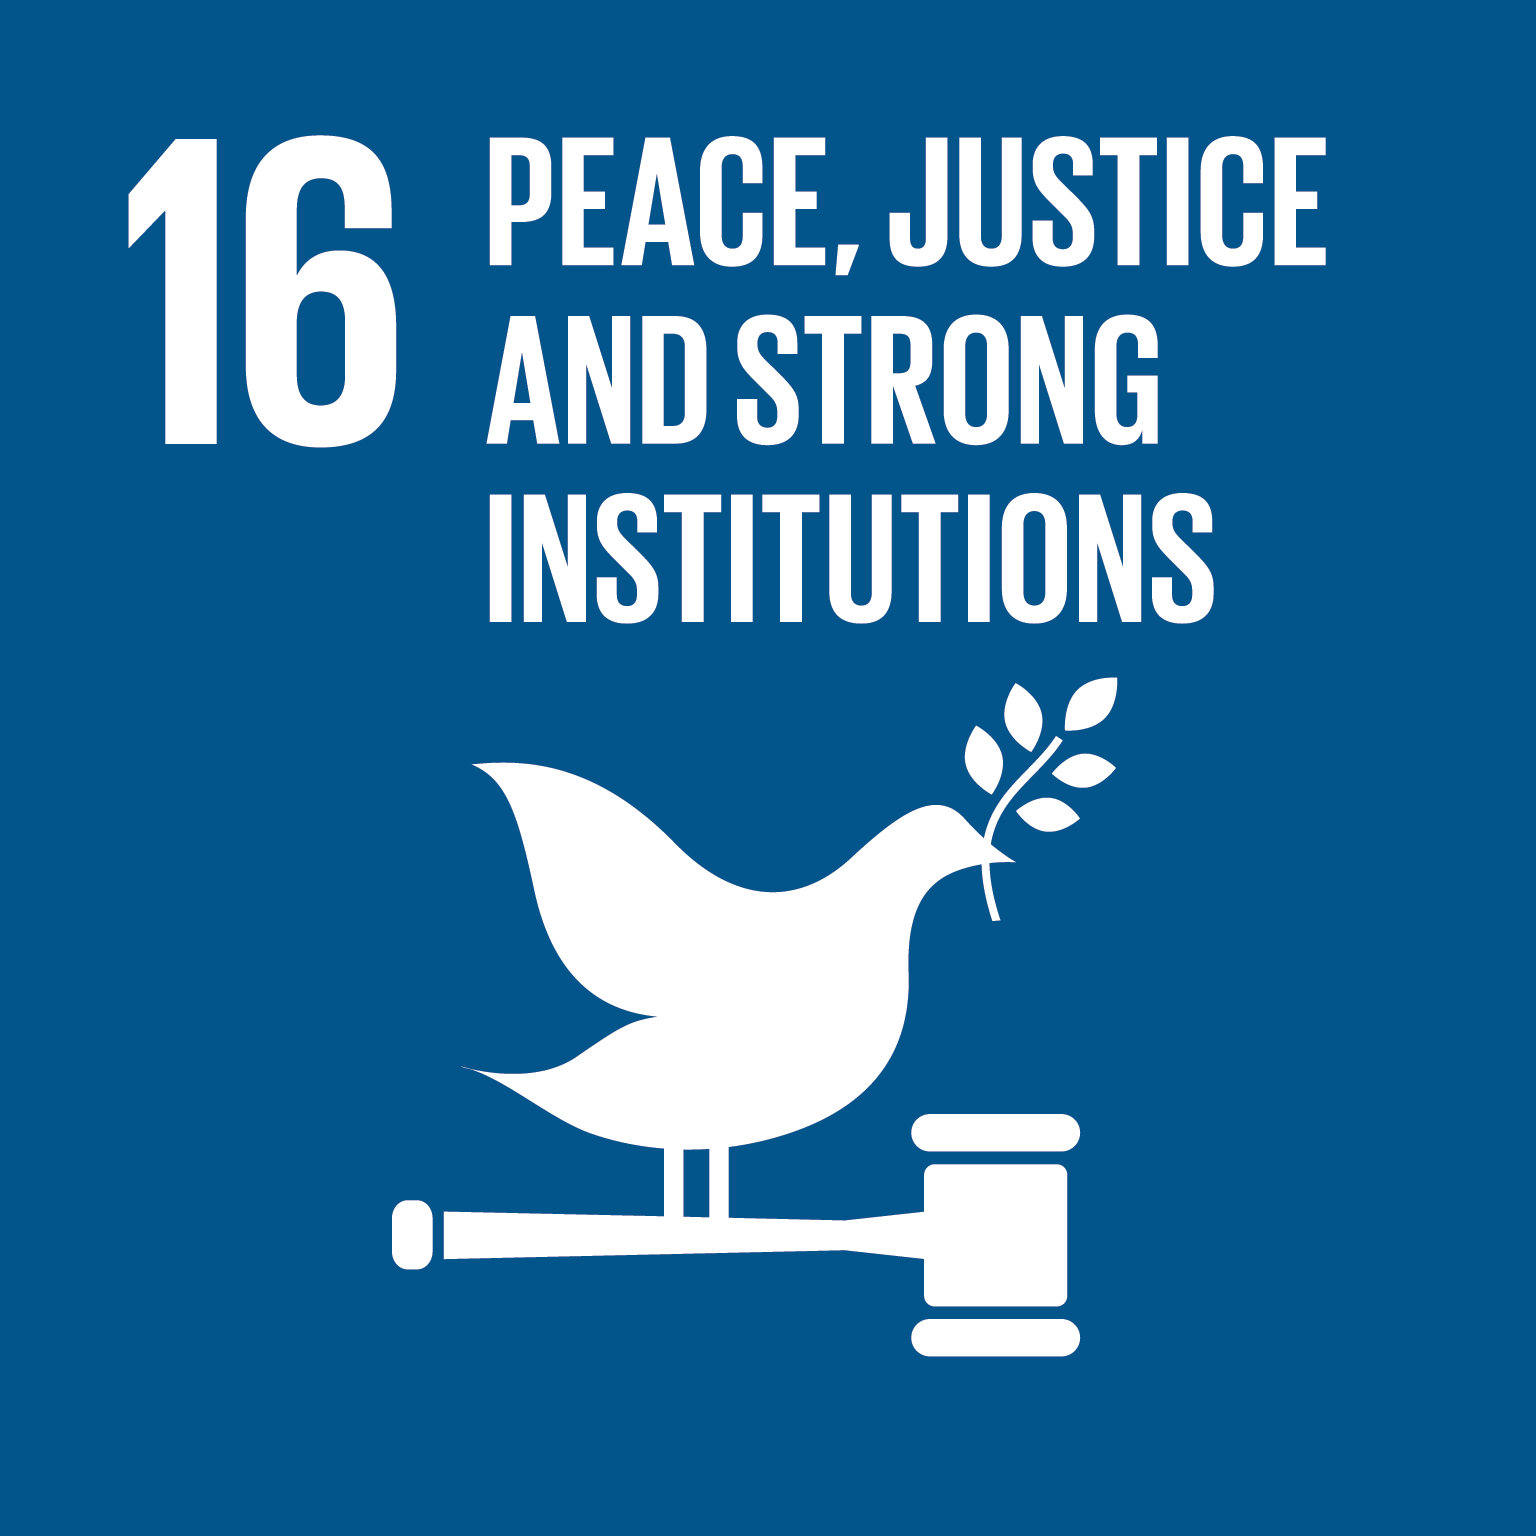 Goal 16 - peace, justice and strong institution